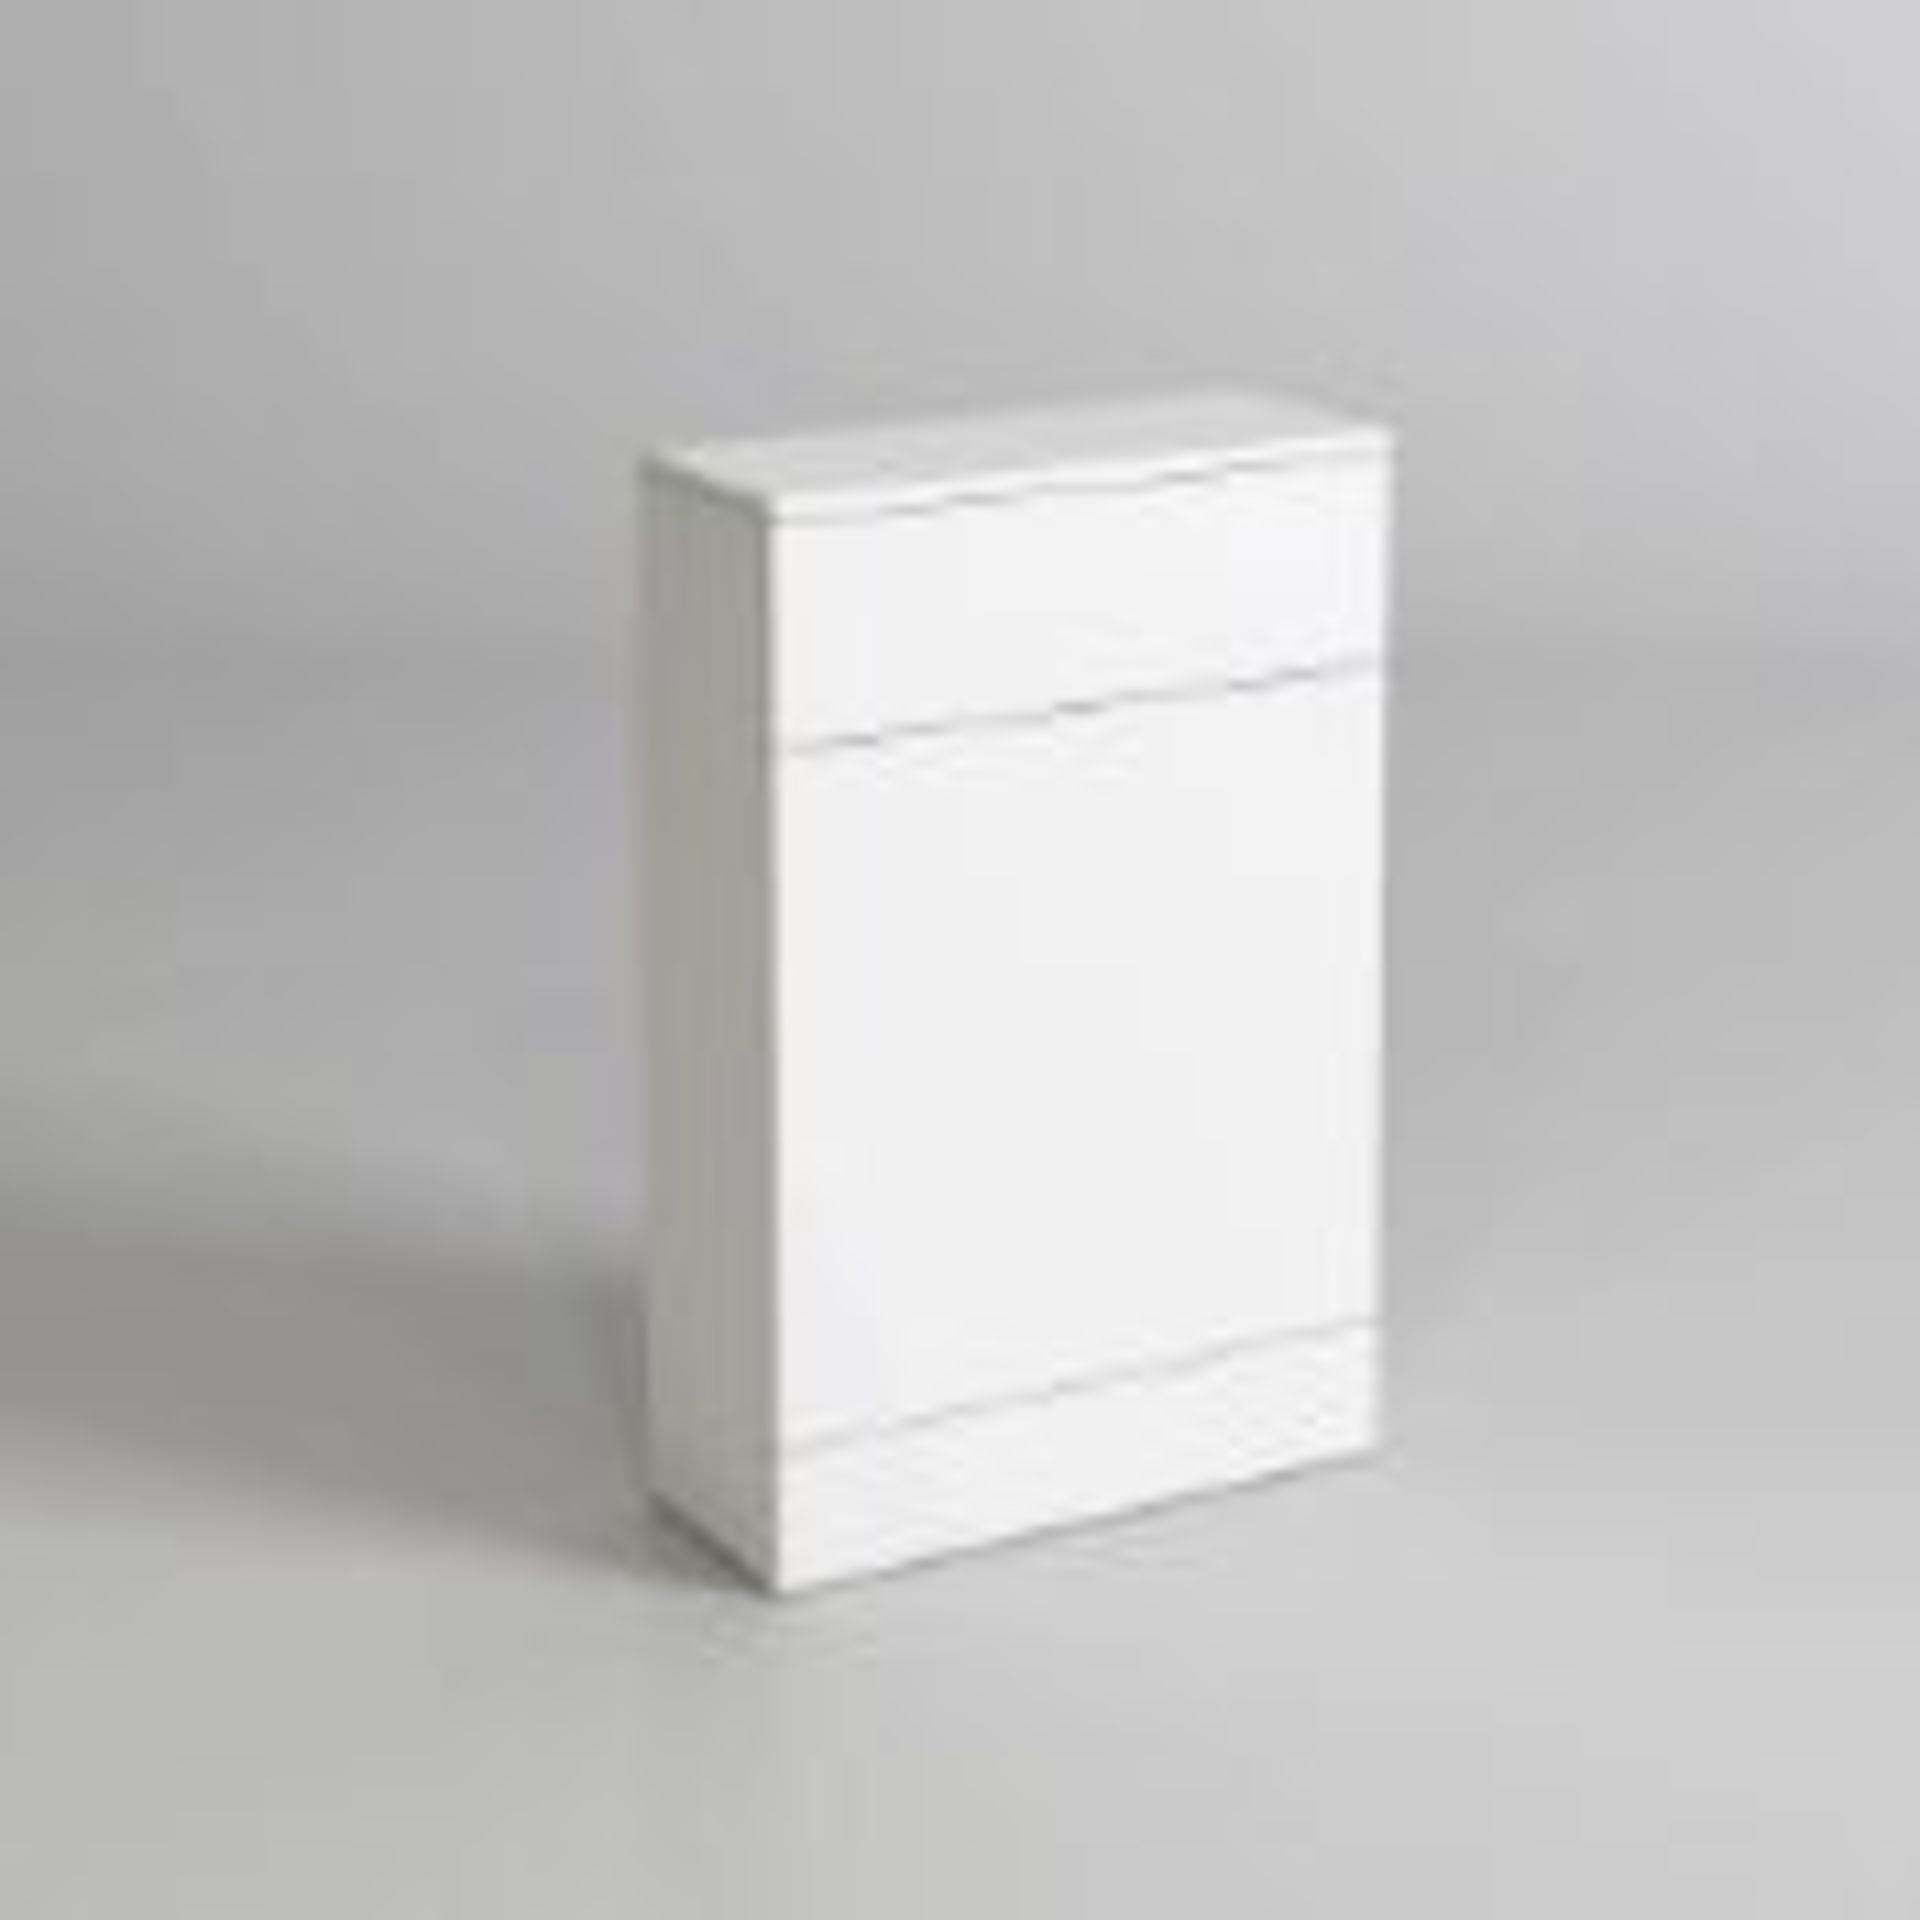 New 500 x 200 mm Concealed Cistern WC Unit Back To Wall Toilet Bathroom Furniture Mf704.Crafted...